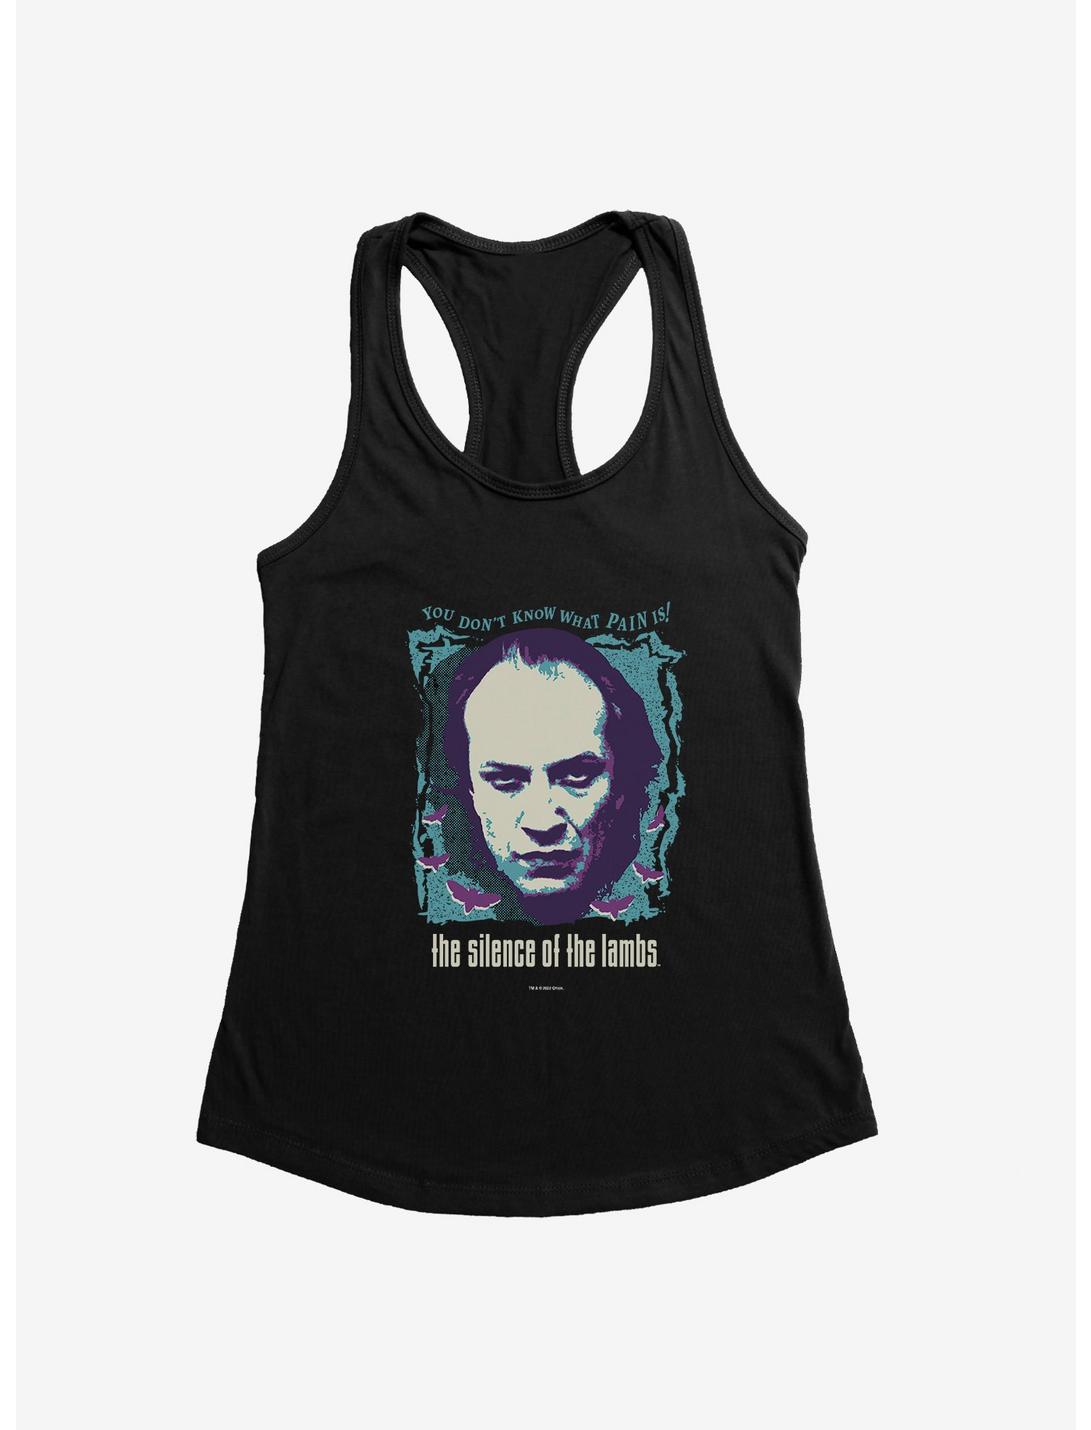 Silence Of The Lambs What Pain Is! Womens Tank Top, , hi-res